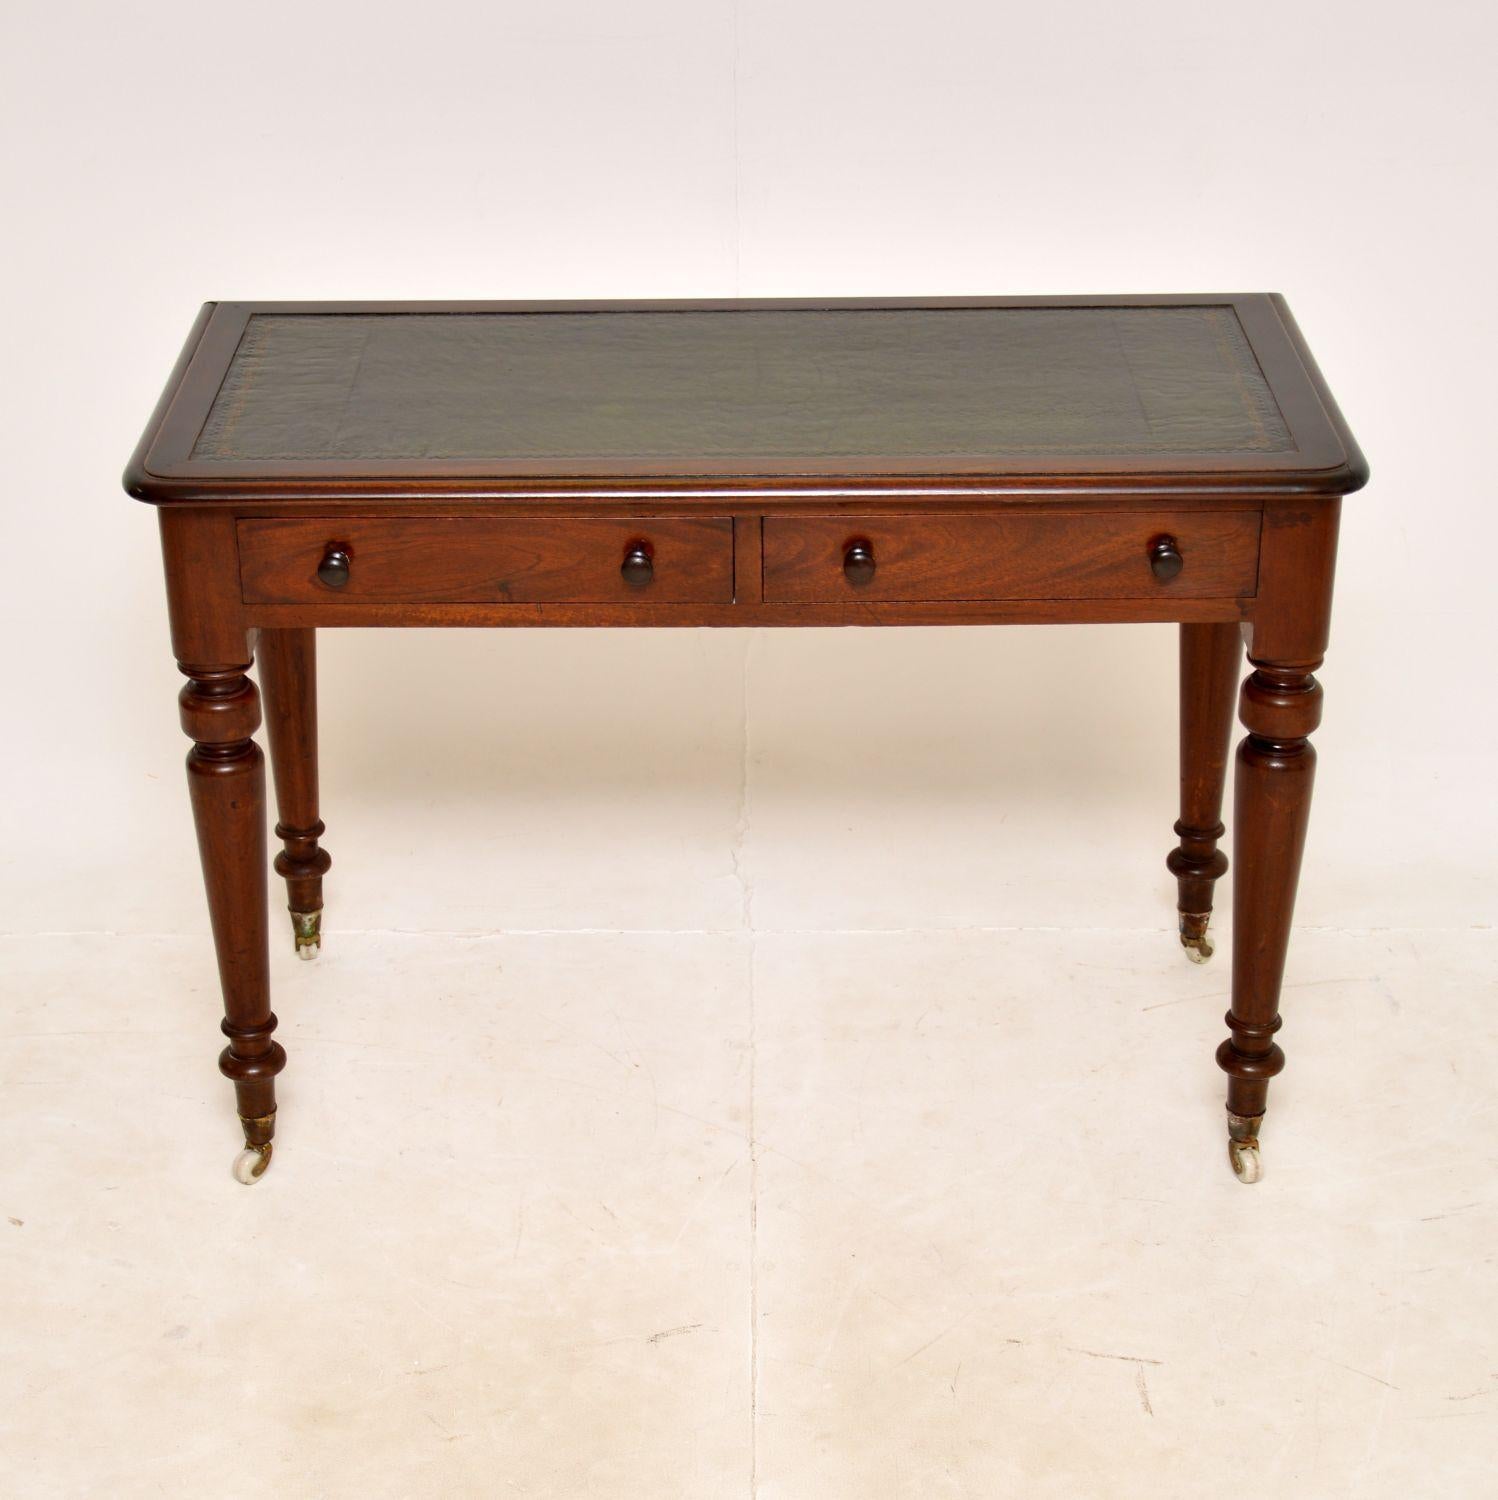 A very smart and useful antique Victorian writing table / desk. This was made in England, it dates from around the 1860-1880 period.

It is a very practical size and is of amazing quality. The beautifully turned legs sit on porcelain casters, the